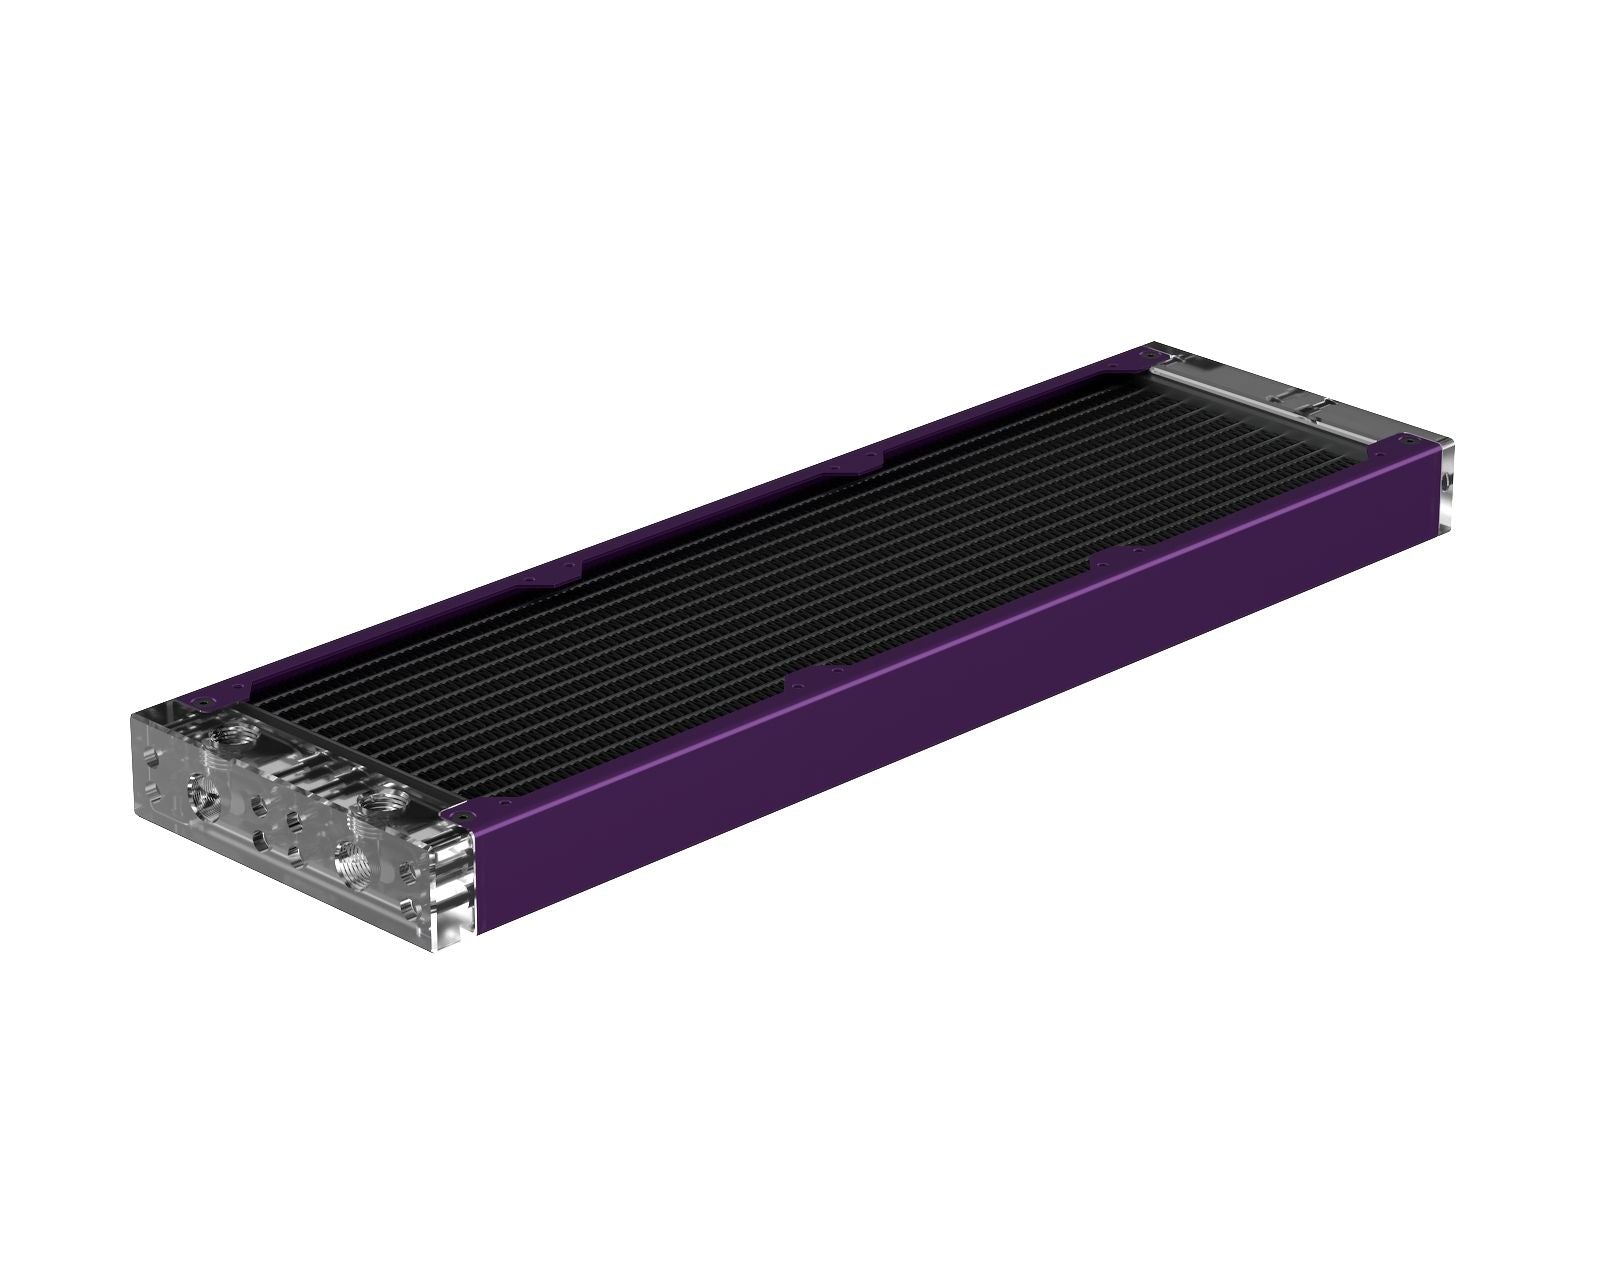 PrimoChill 360SL (30mm) EXIMO Modular Radiator, Clear Acrylic, 3x120mm, Triple Fan (R-SL-A36) Available in 20+ Colors, Assembled in USA and Custom Watercooling Loop Ready - Candy Purple